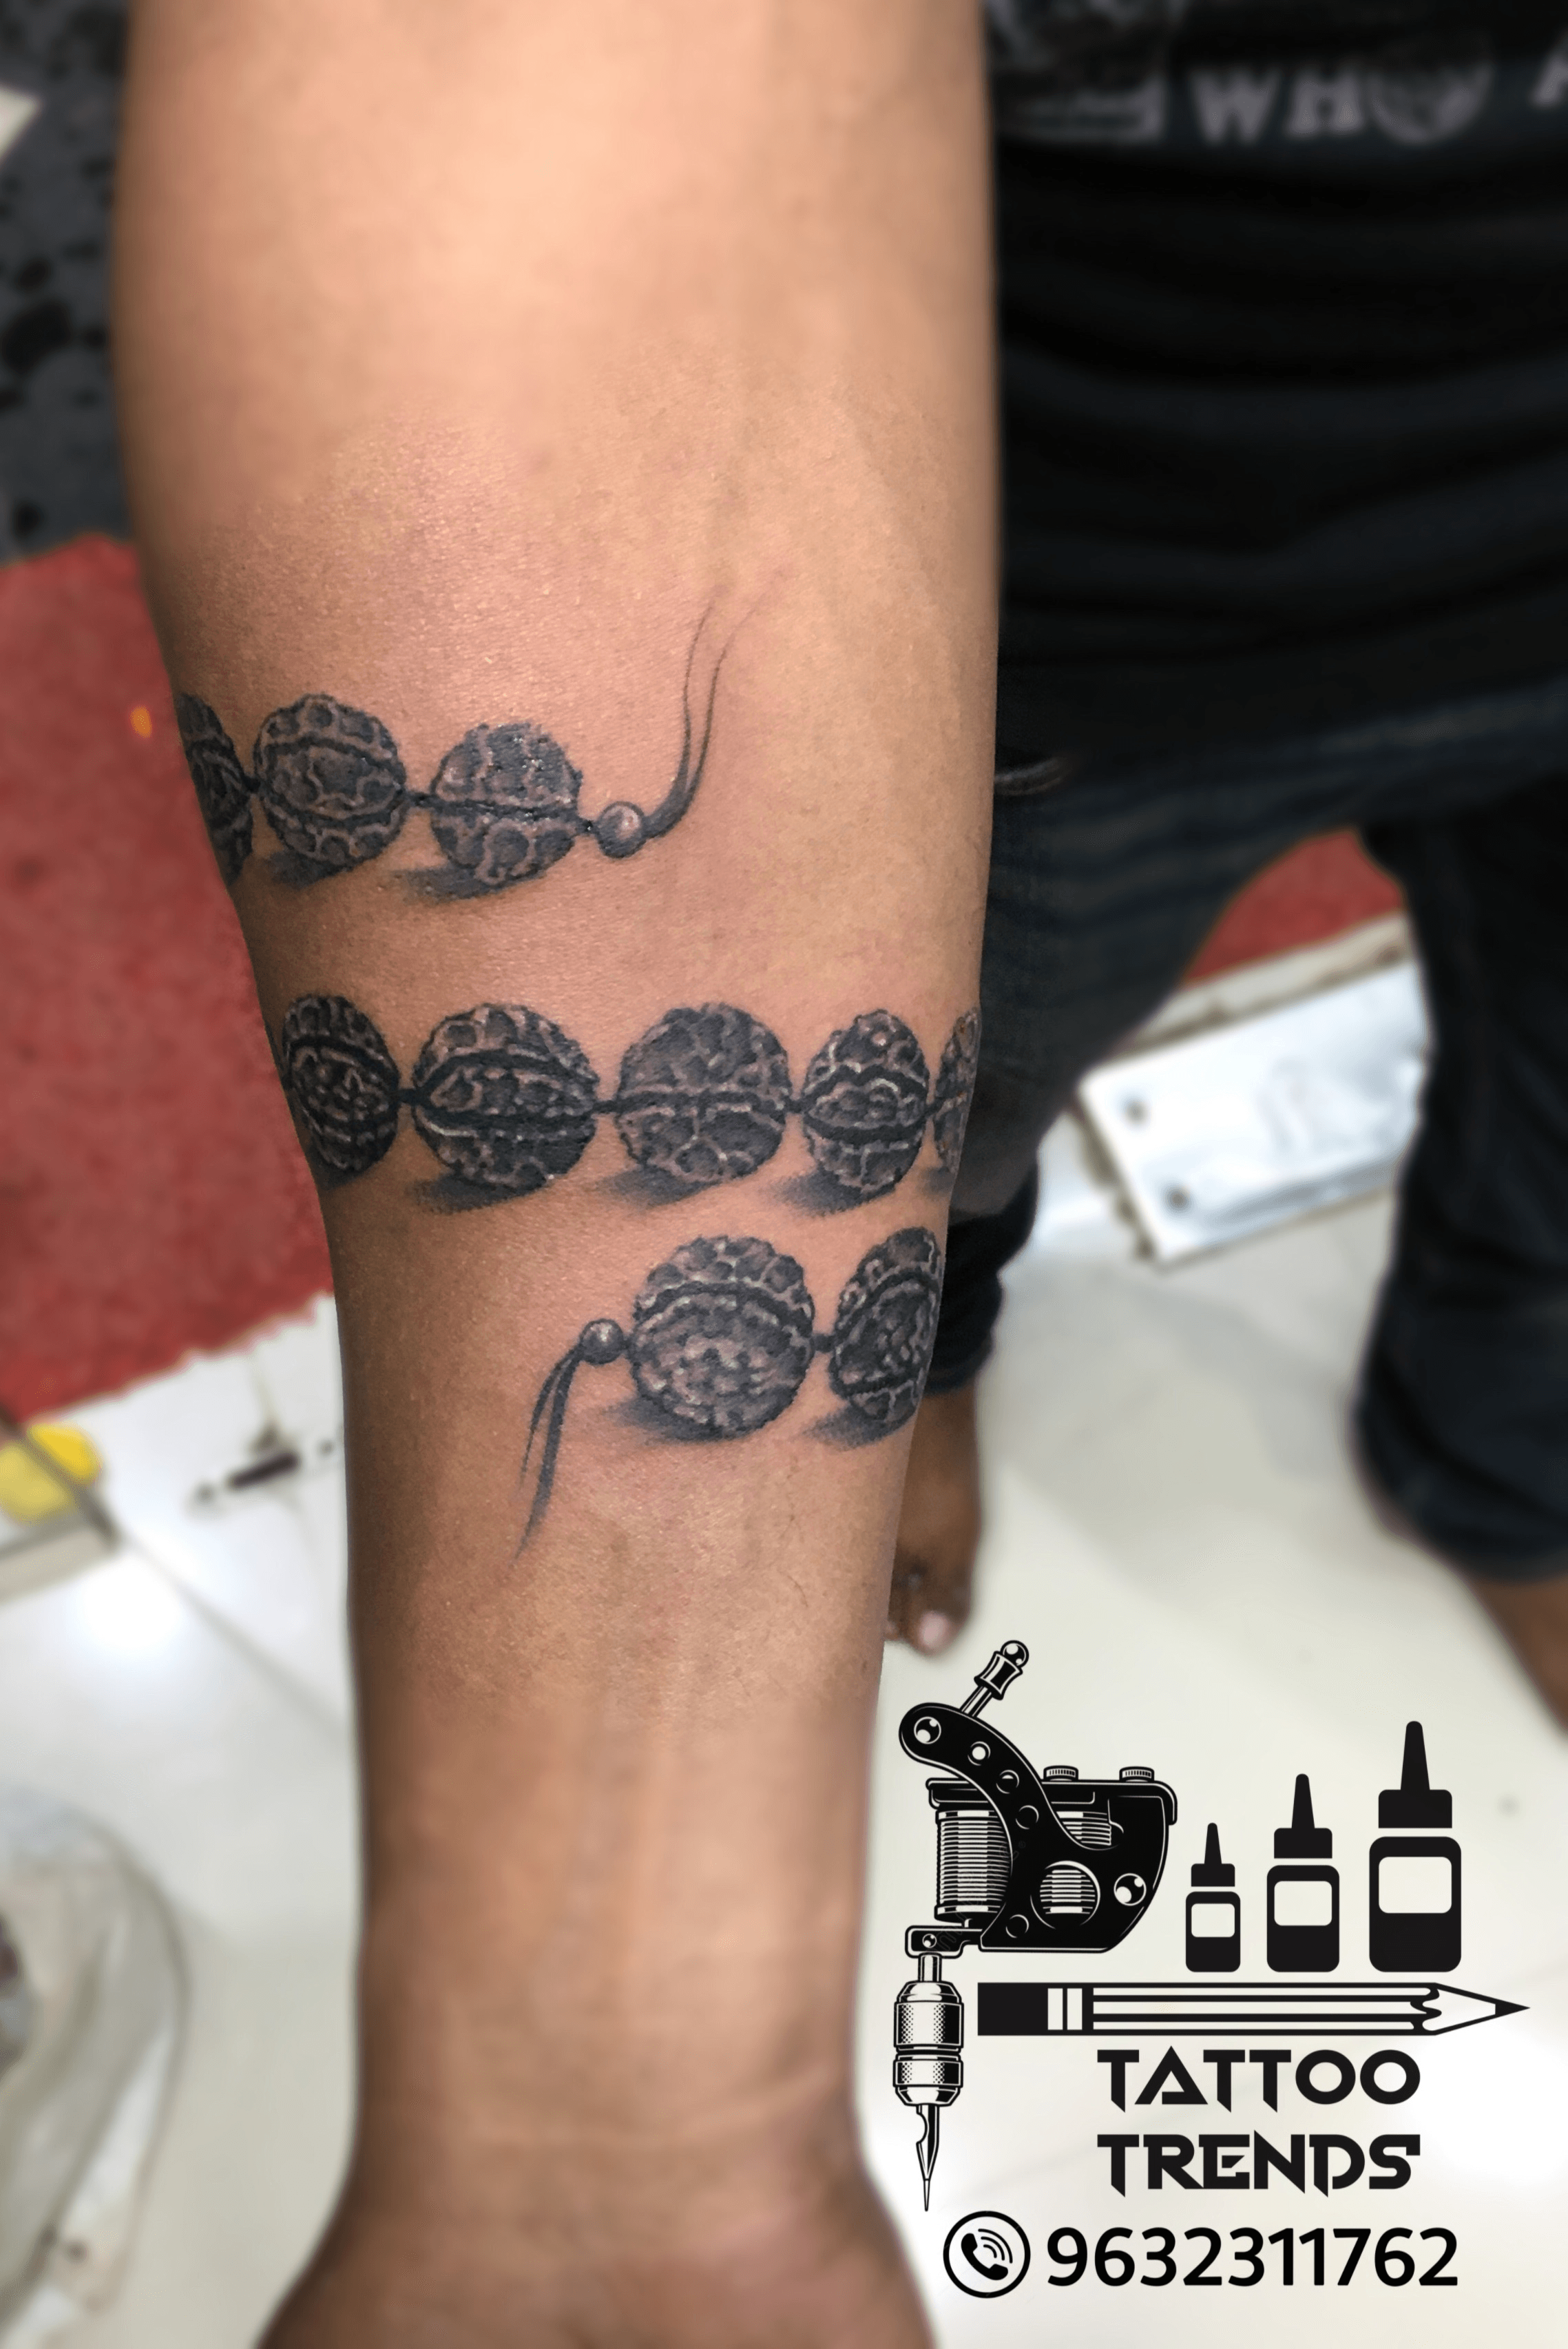 181 Tattooz Studio  Om with Trishul  Rudraksha and Damroo and Lord  Ganesha by faceThis design is Rectified from a random online tattoo design   if you are planning to get